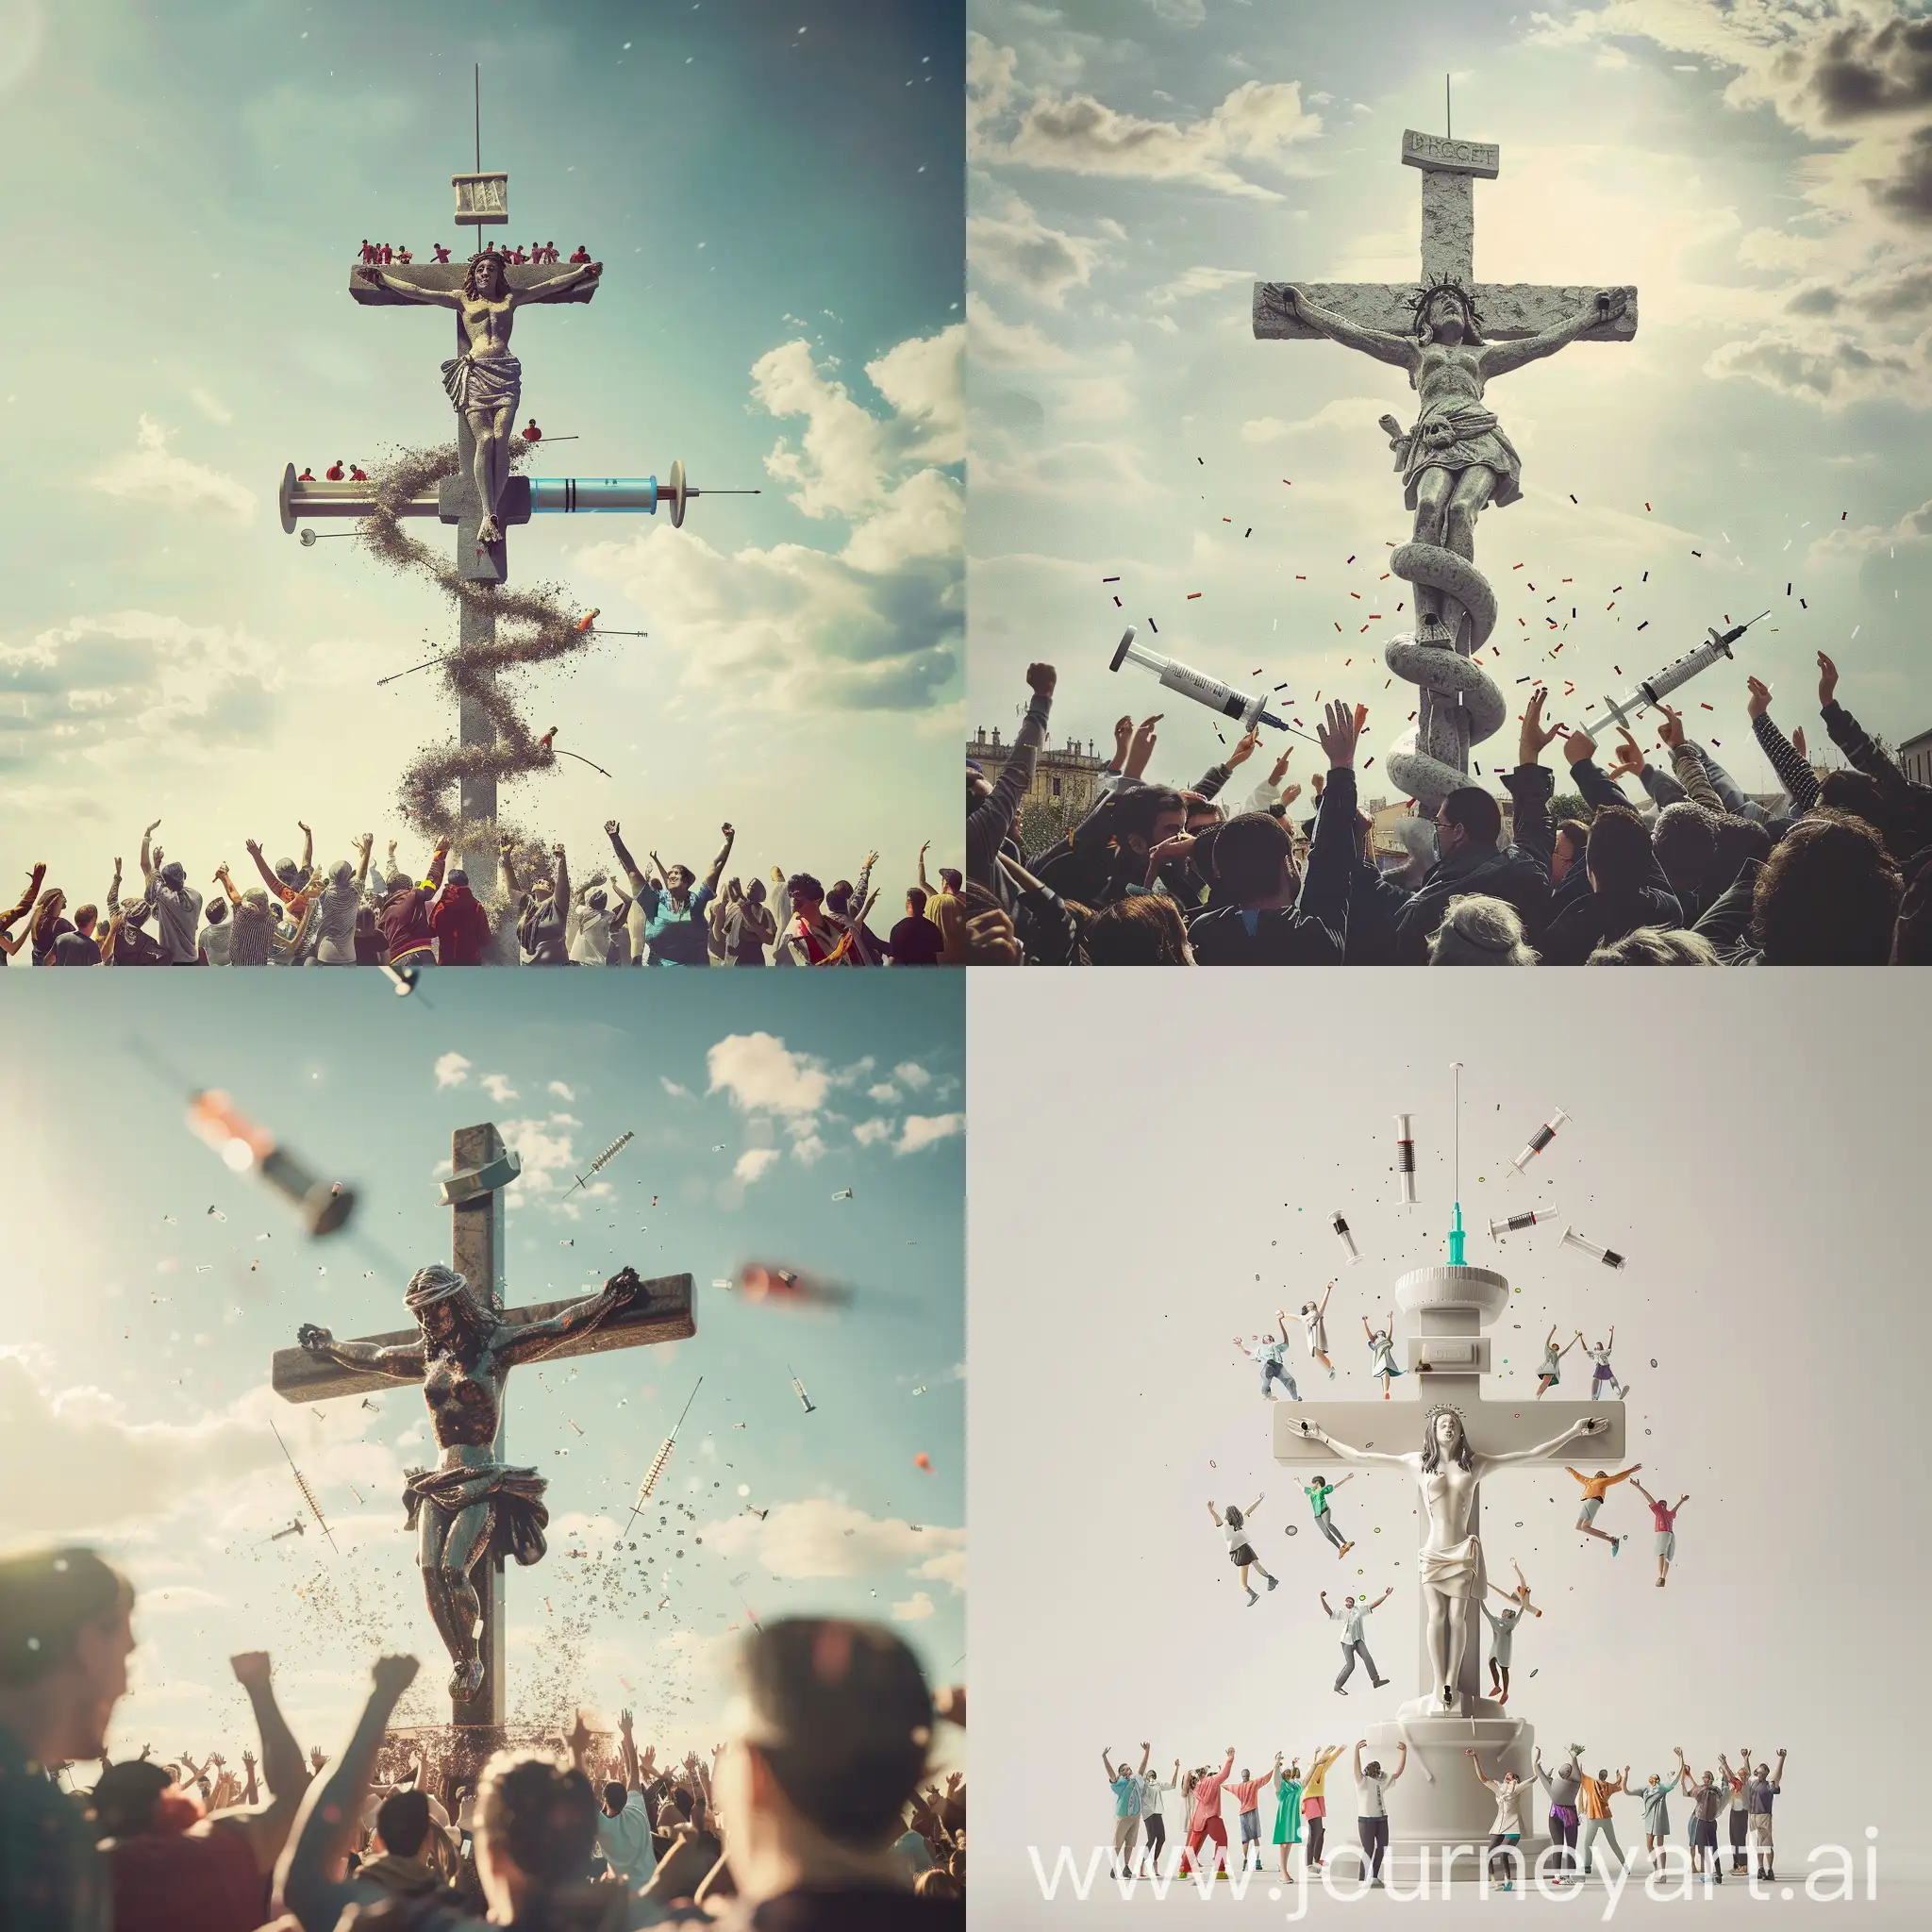 A monument which represents a crucified female nurse. The monument is surrounded by living people celebrating. The cross is shaped as a syringe.